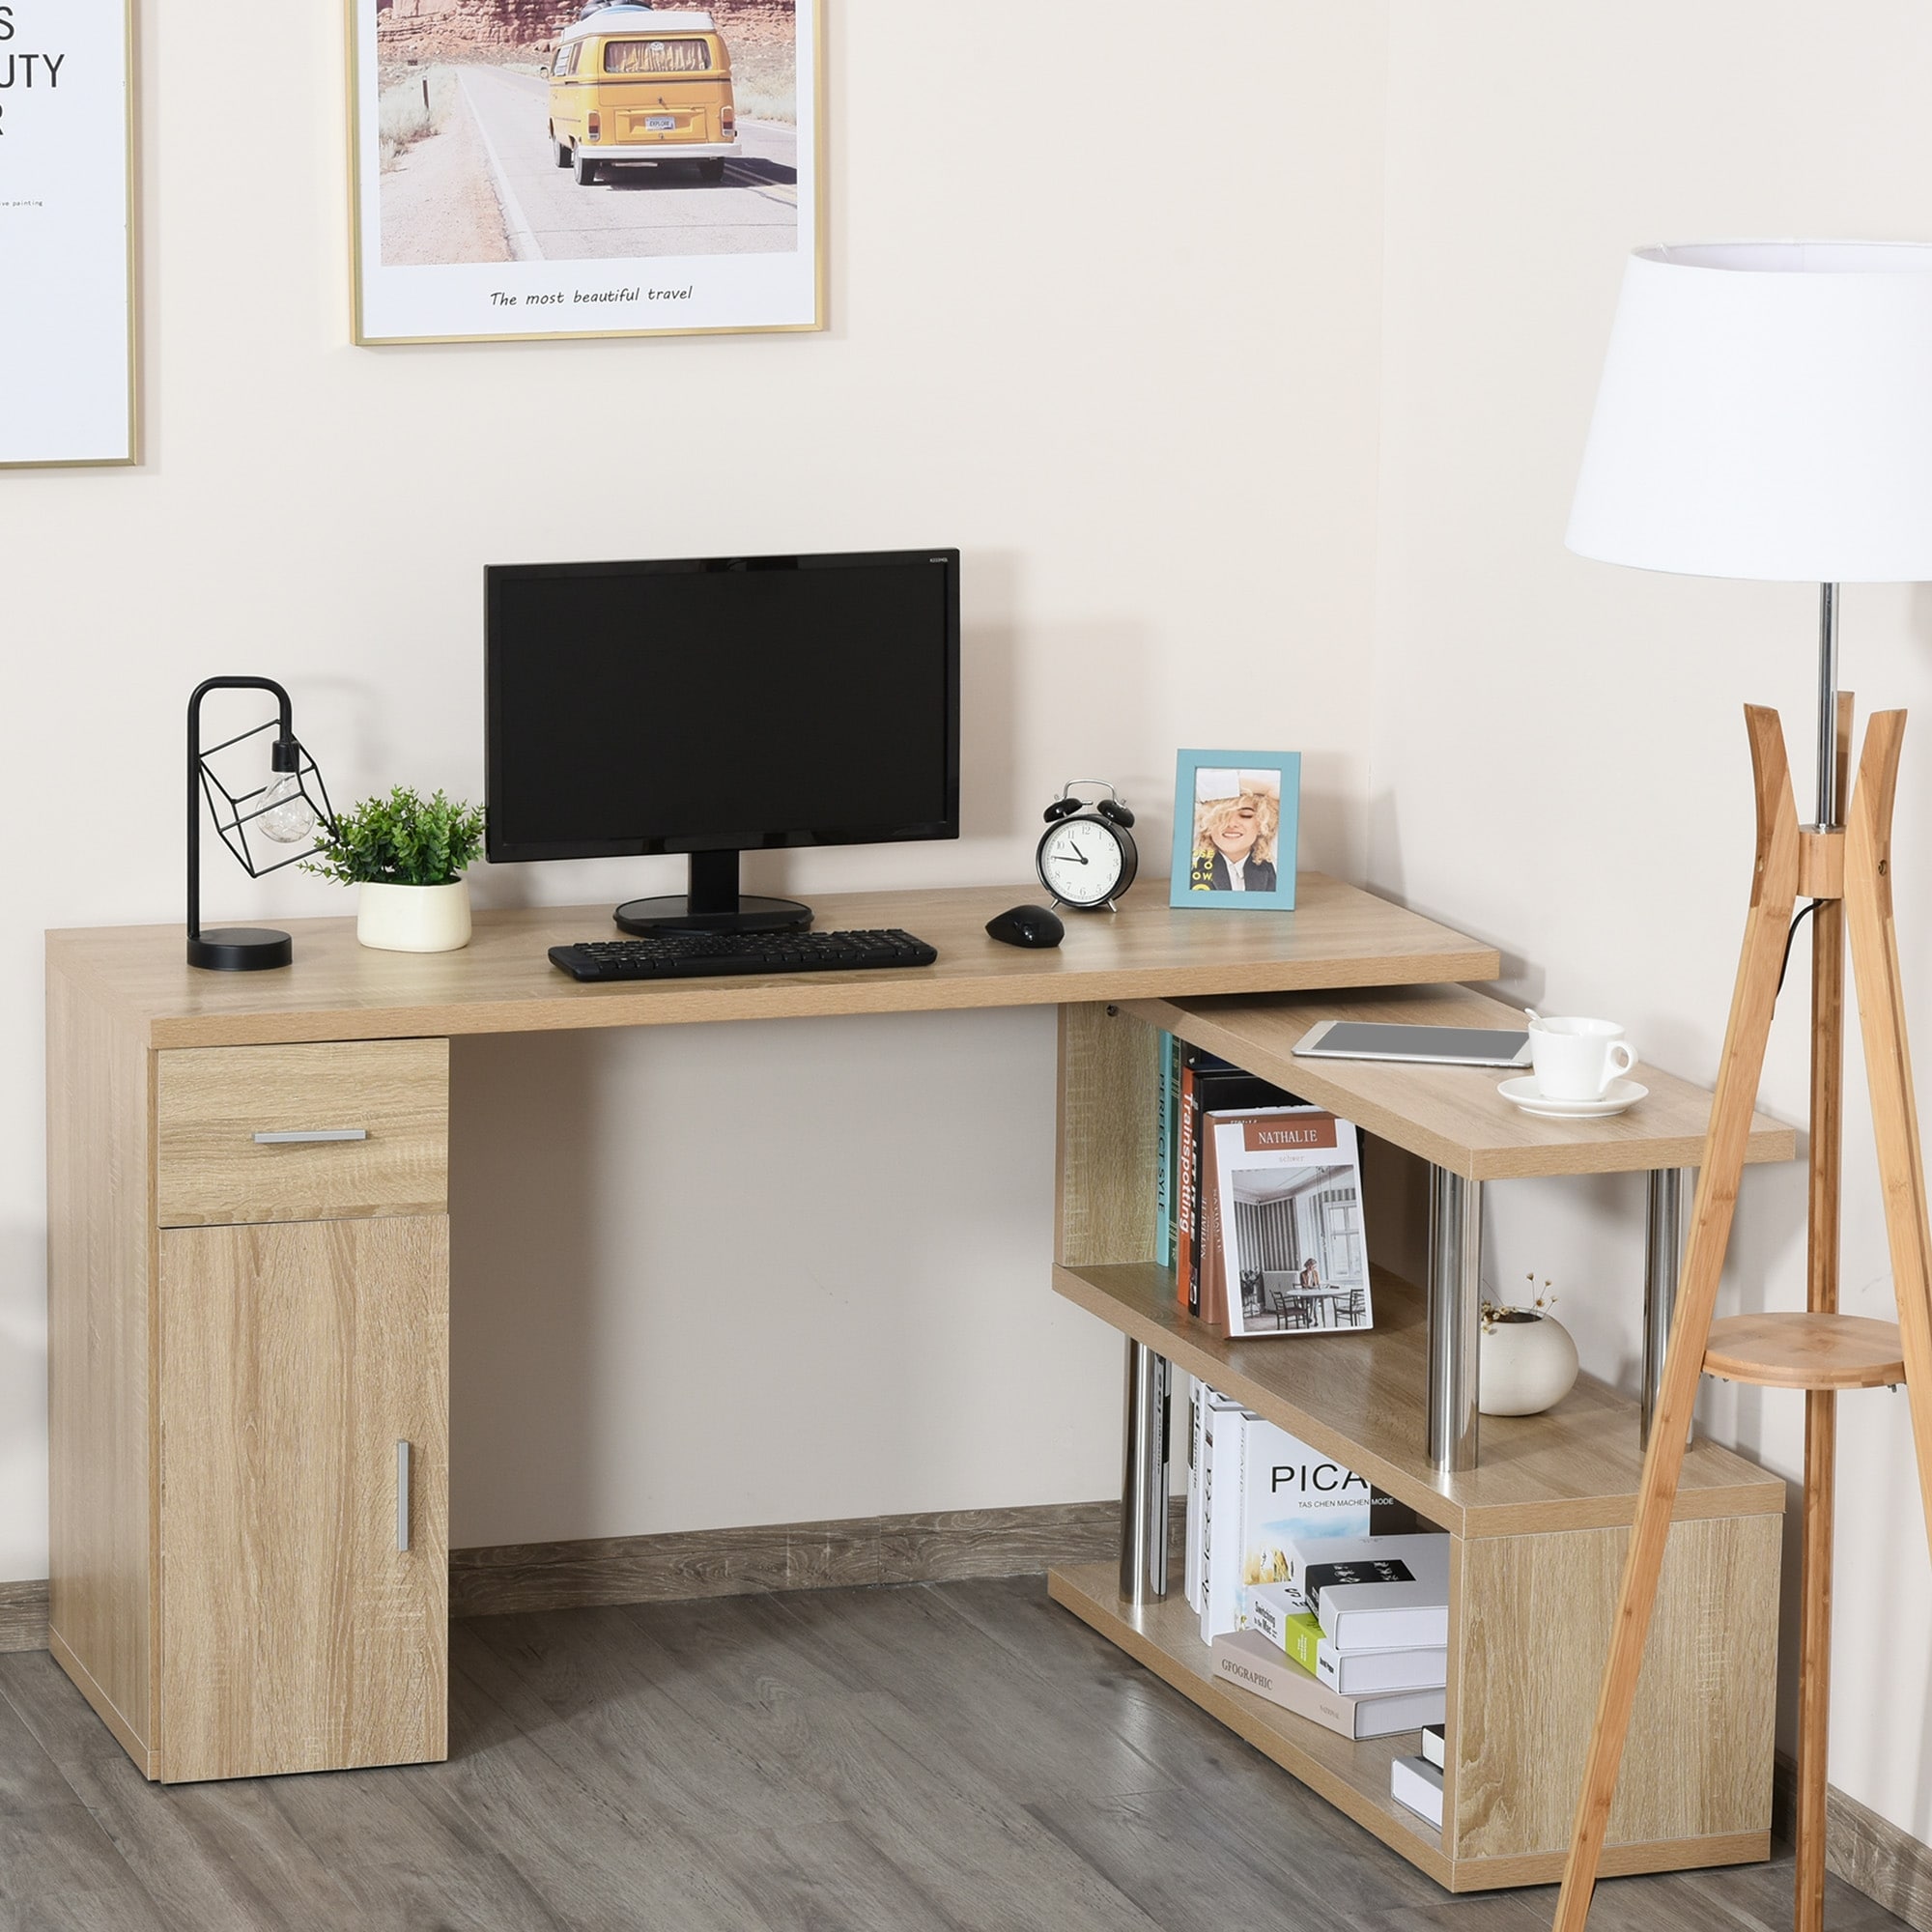 https://ak1.ostkcdn.com/images/products/is/images/direct/67e3a89adfdfda12ab5d509f24063c897bff90be/HOMCOM-L-Shaped-Computer-Desk-Workstation-with-Storage-Shelves%2C-Cabinet-and-Drawer-for-Home-%26-Office.jpg